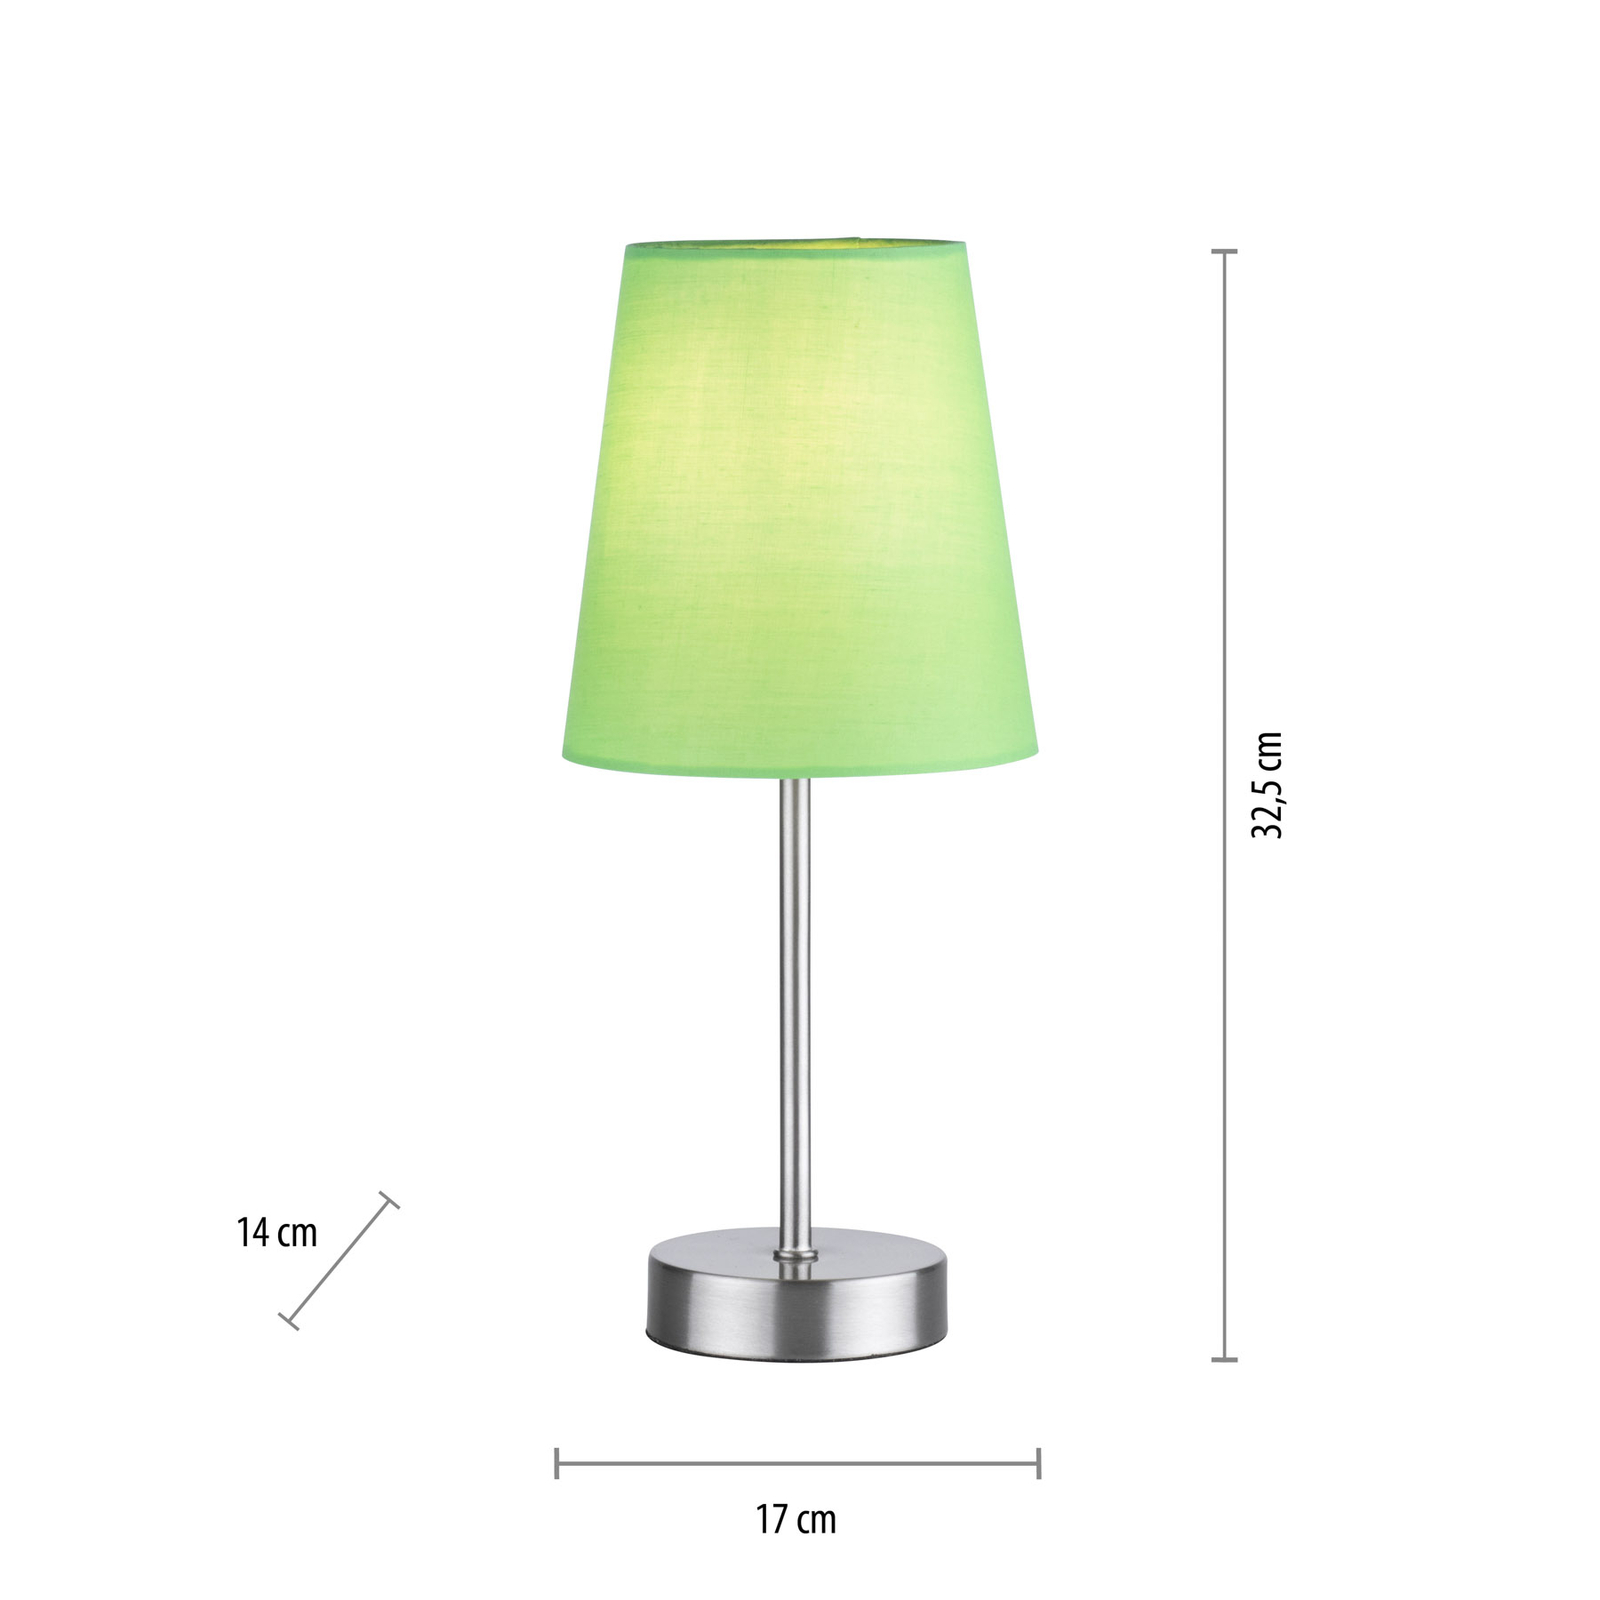 Heinrich table lamp with green fabric shade